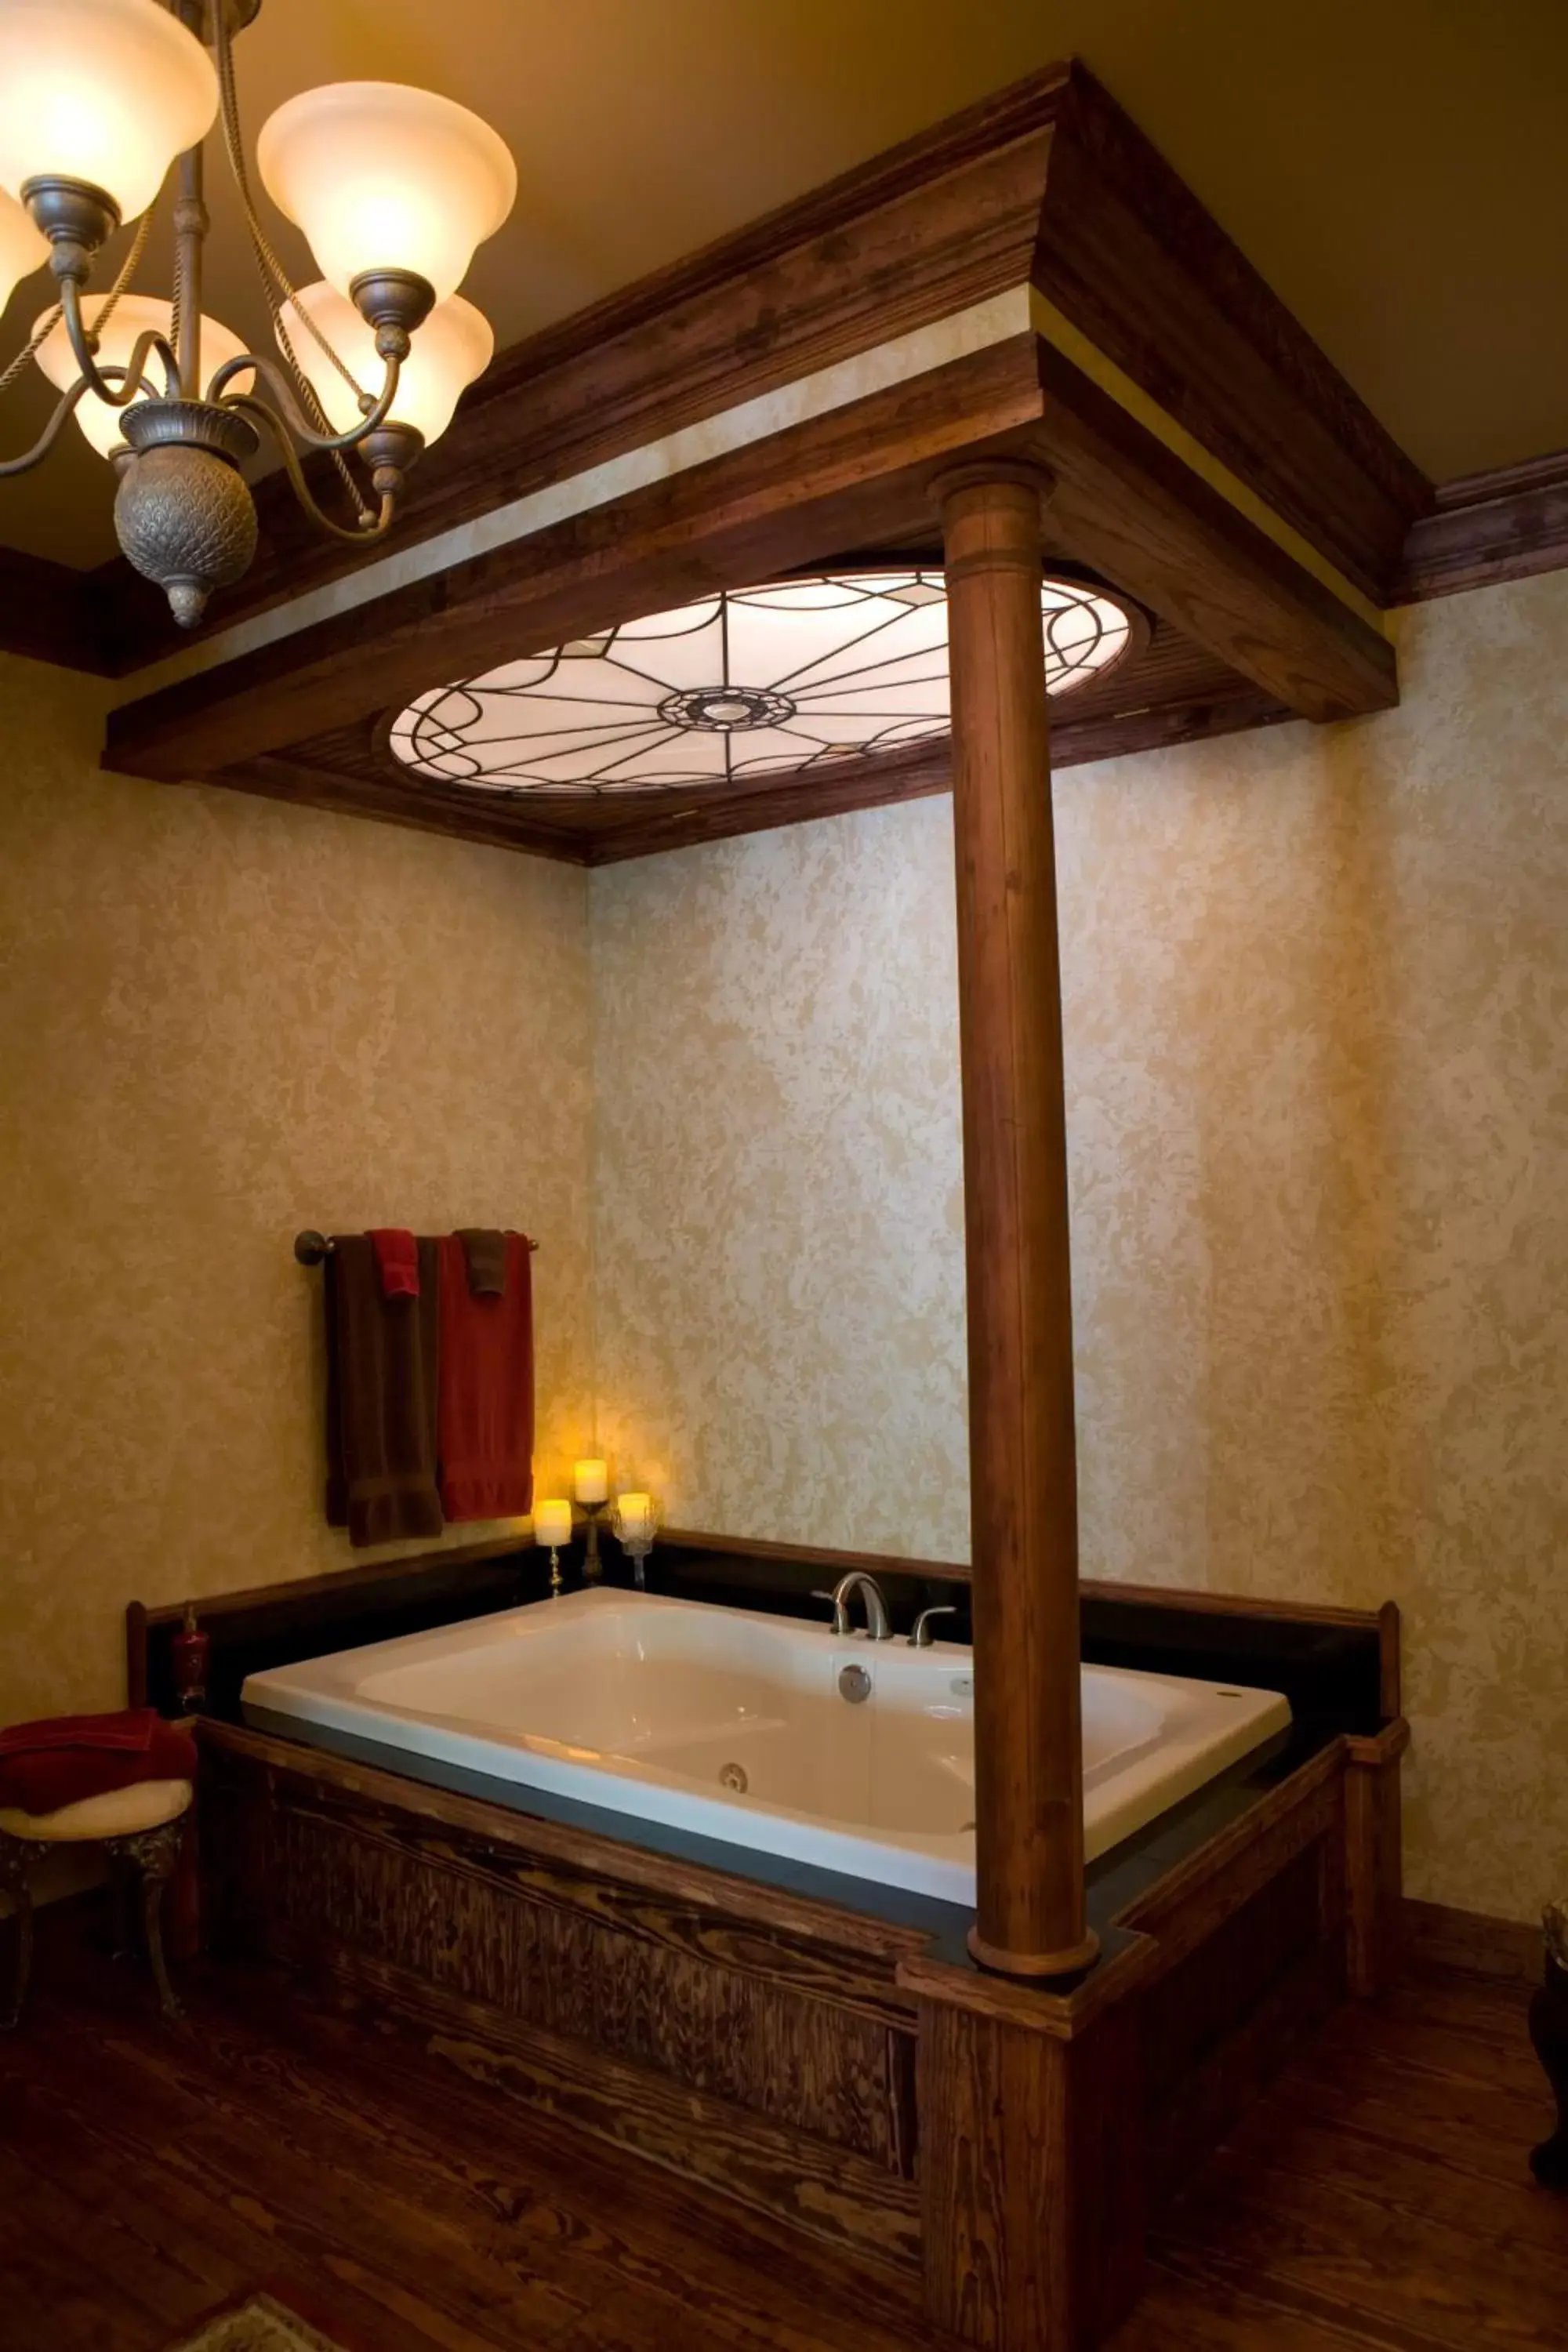 Bathroom in Bed and Breakfast on White Rock Creek